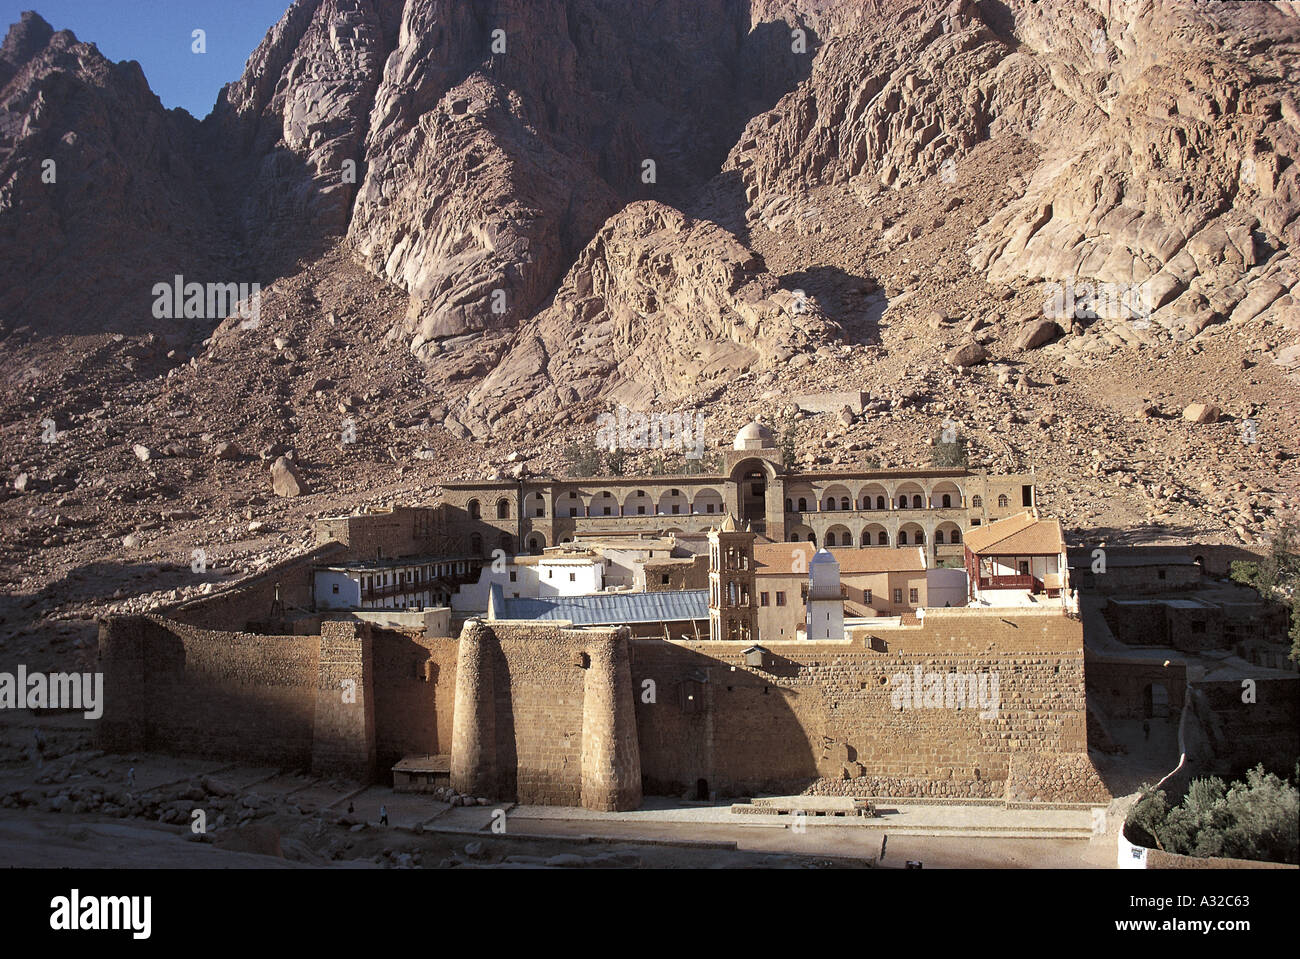 St Catherine s Monastery in Sinai Founded in 527 by the Byzantine emperor Justinian I. Stock Photo